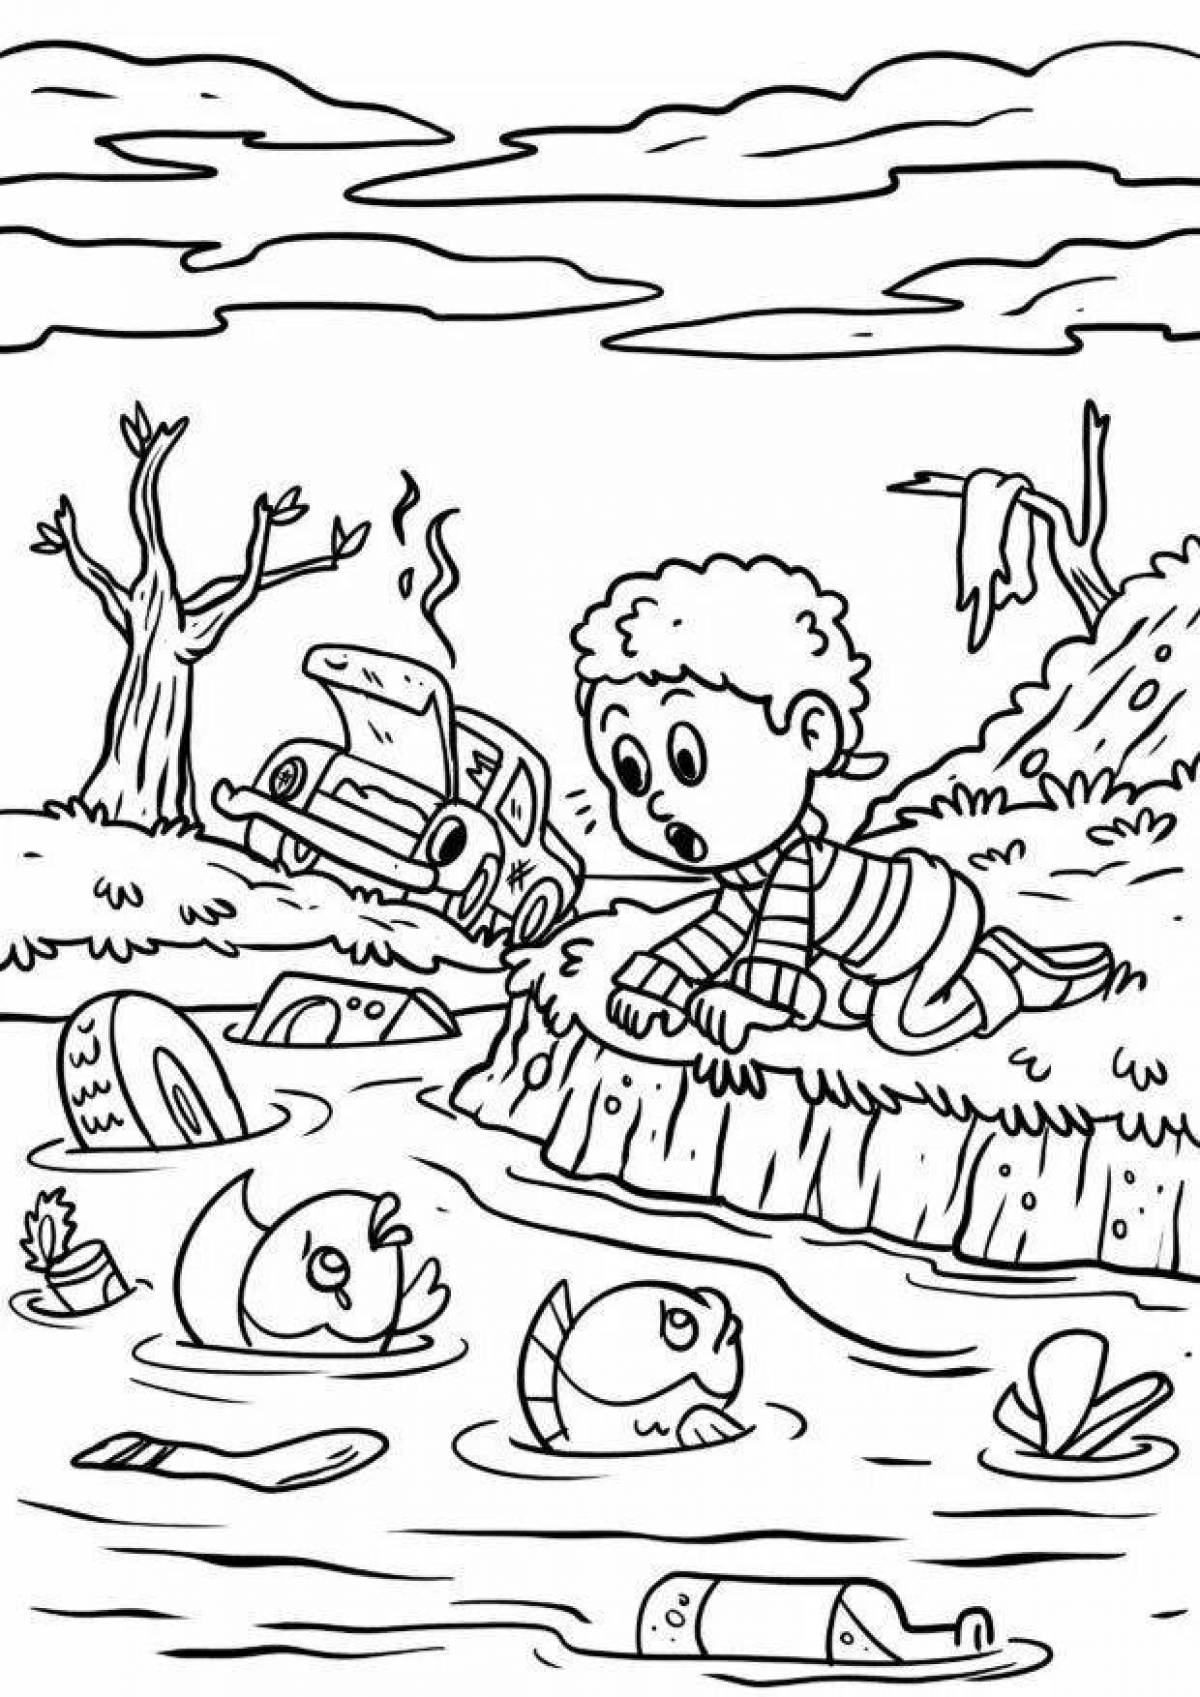 Innovative save water coloring page